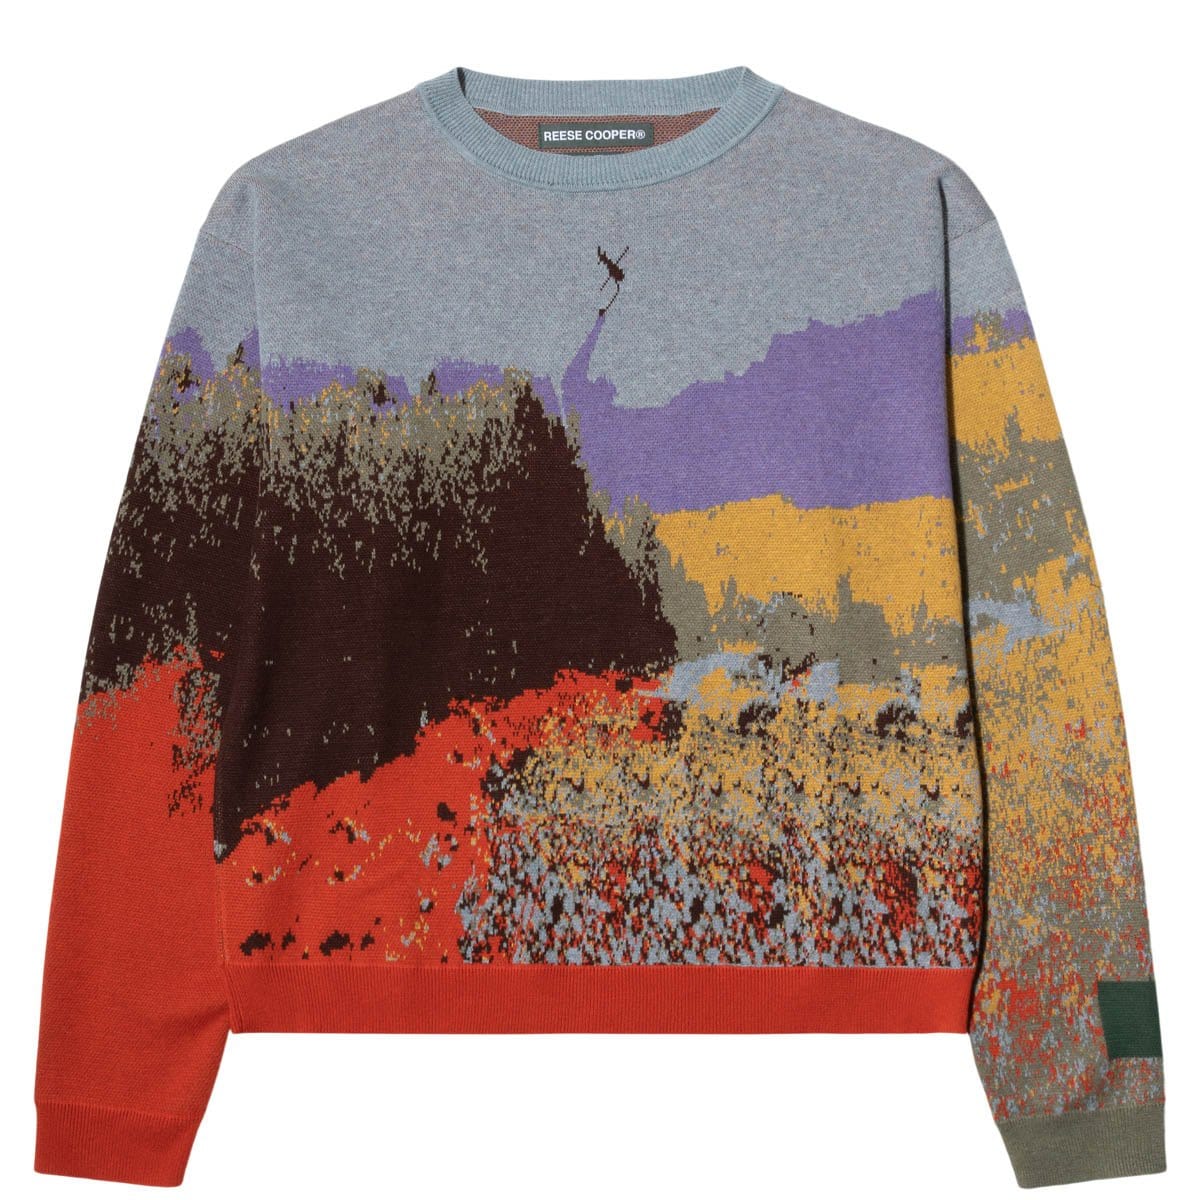 Reese Cooper Knitwear WESTERN WILDFIRES JACQUARD KNIT SWEATER